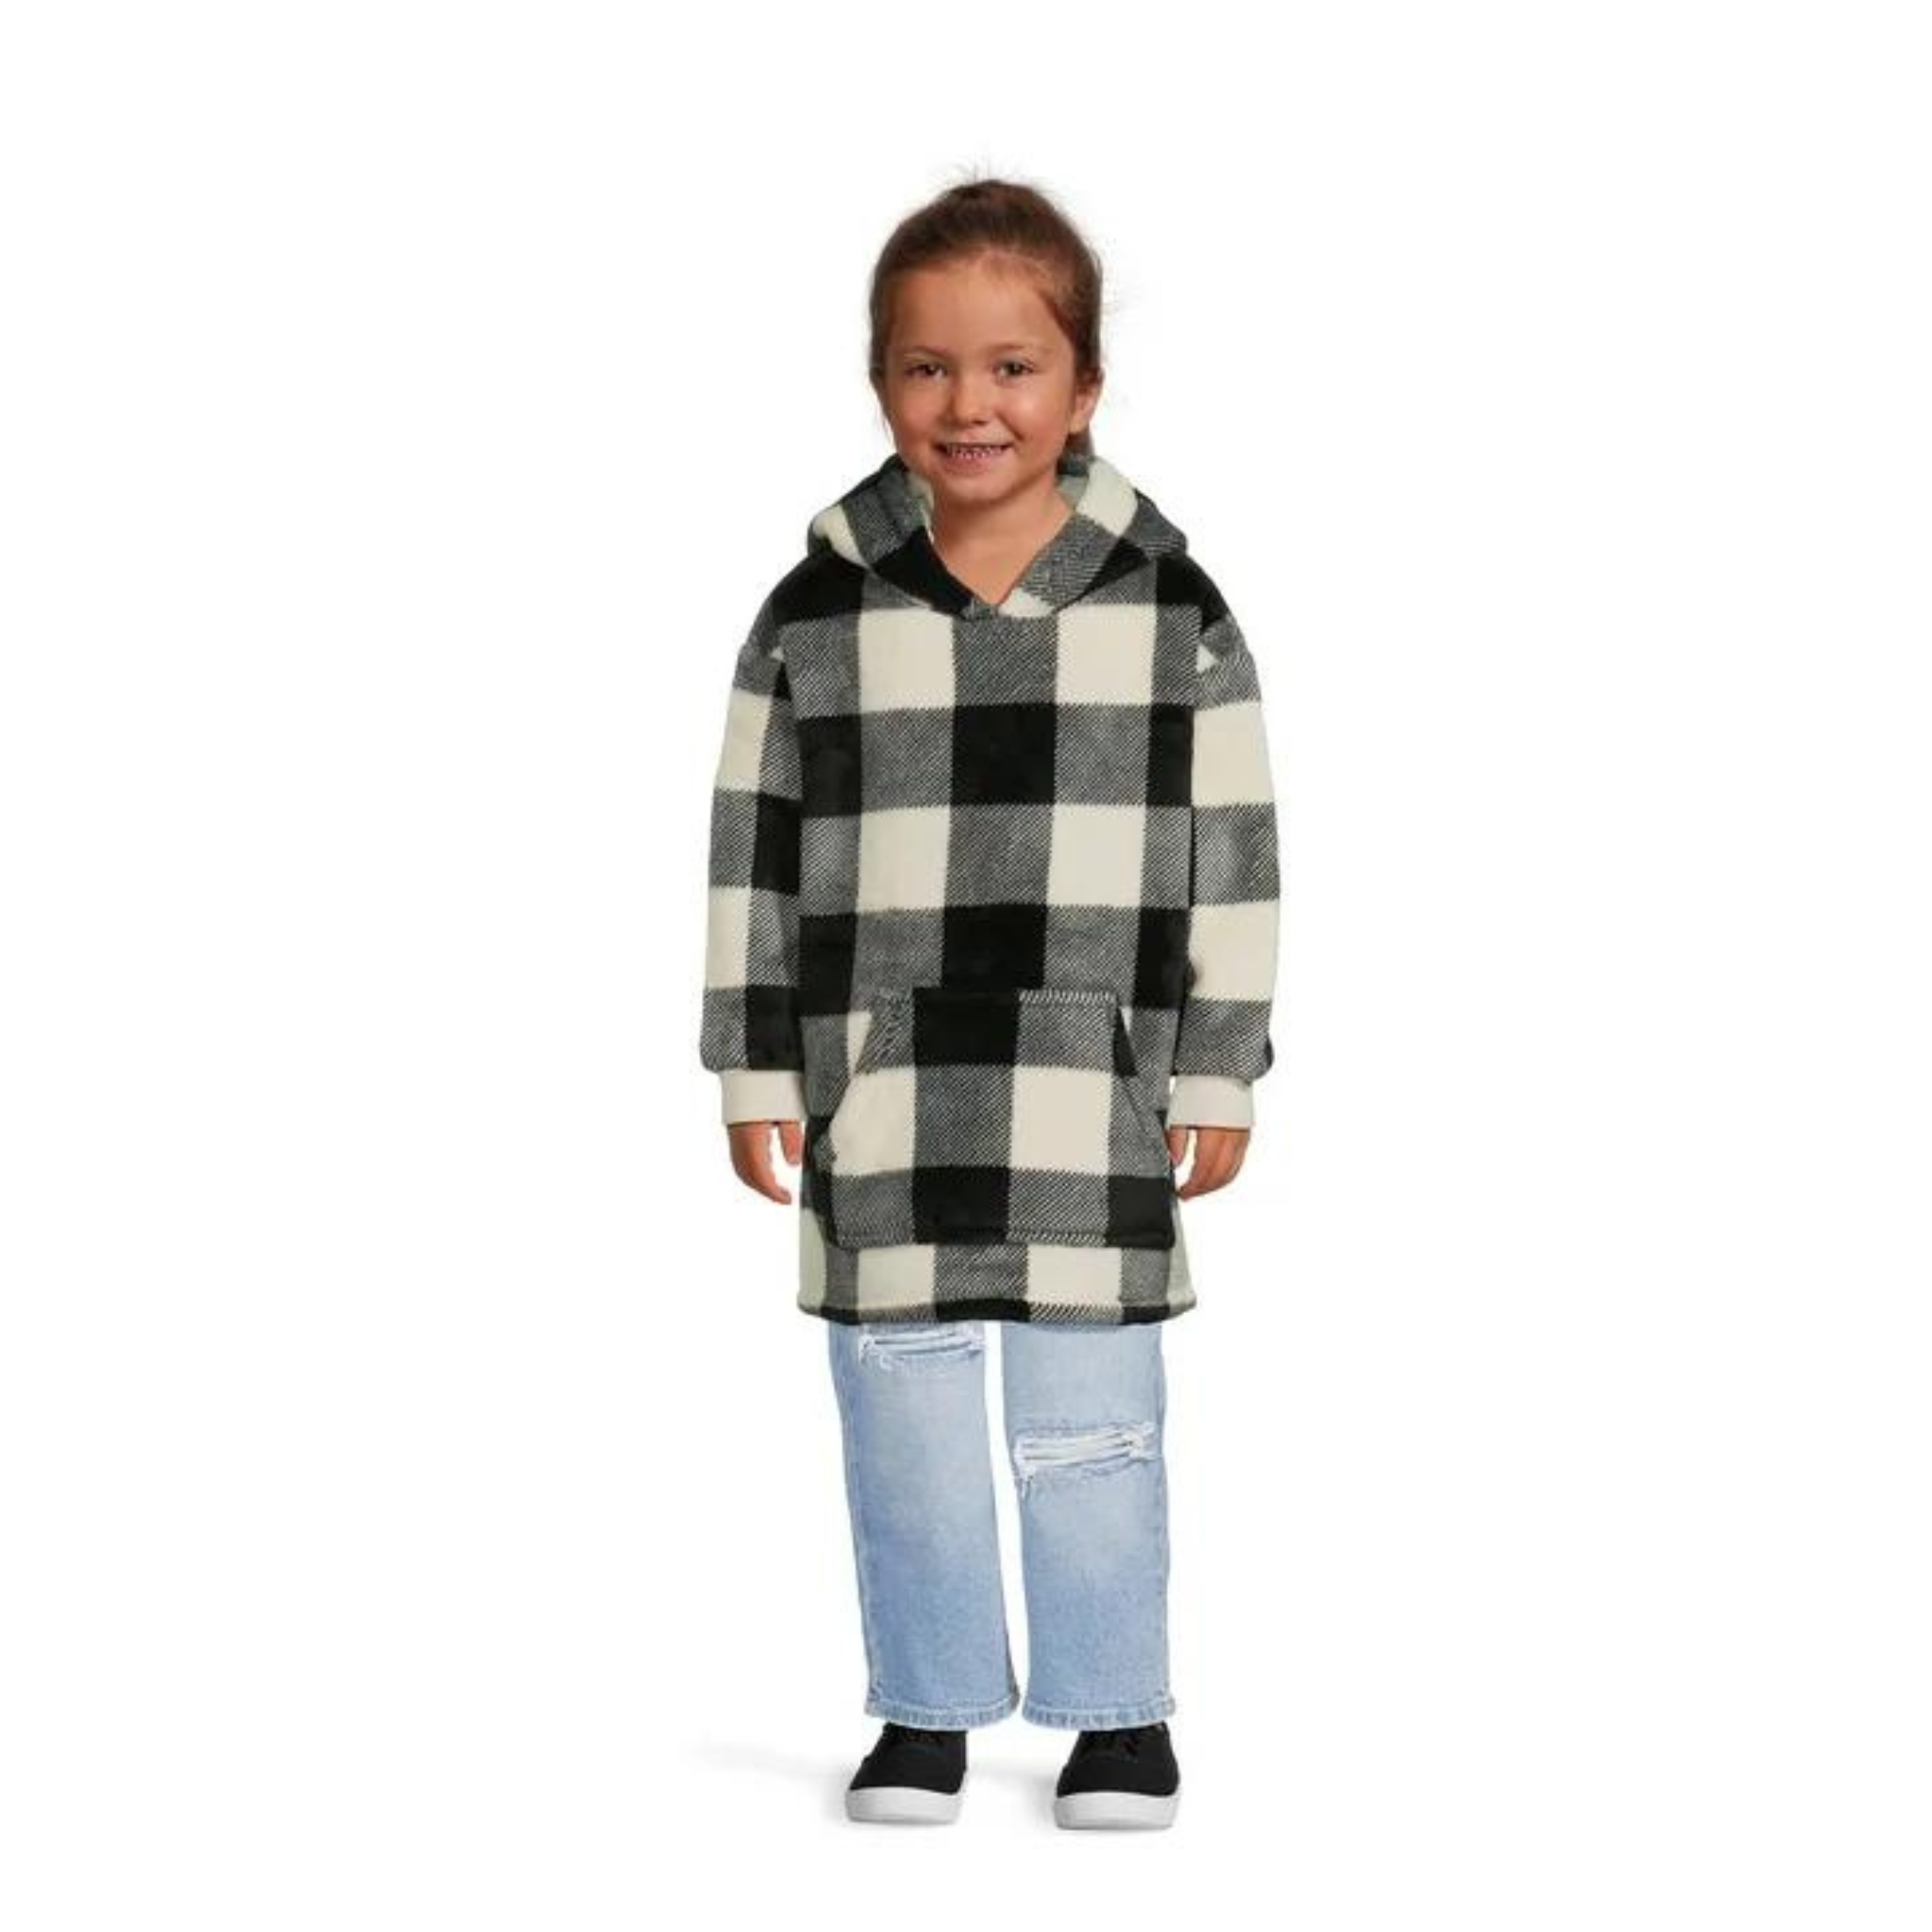 Walmart Winter Clothing Clearance Sale!